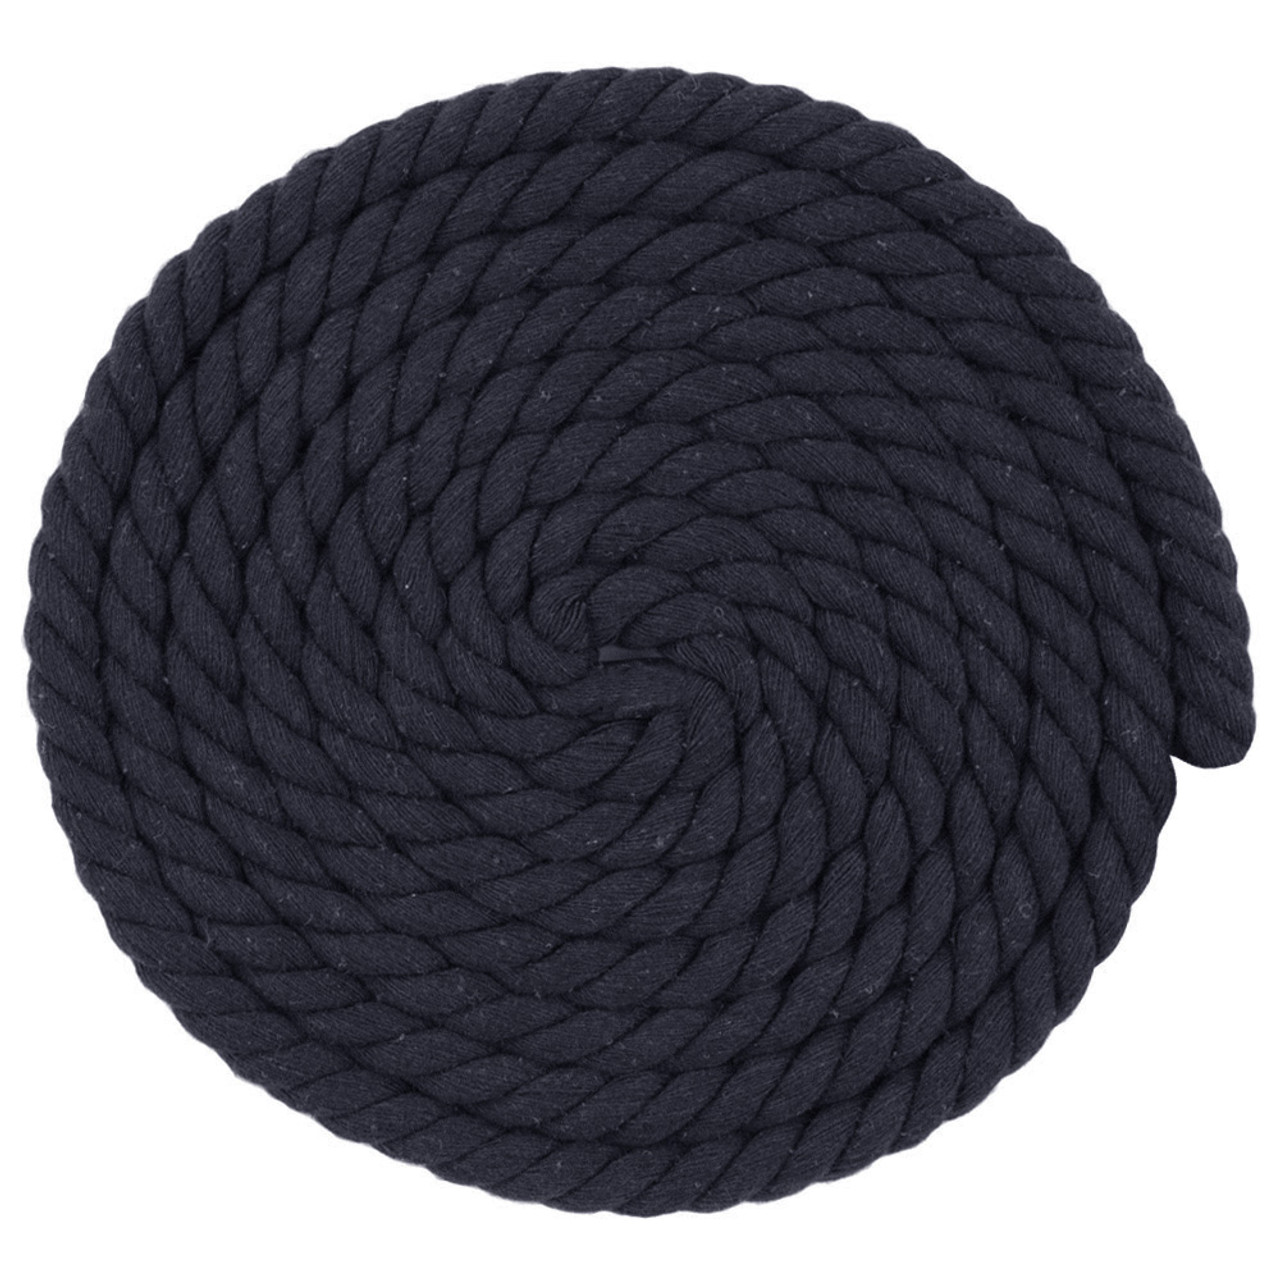 1/2 Inch Twisted Cotton Rope - Black